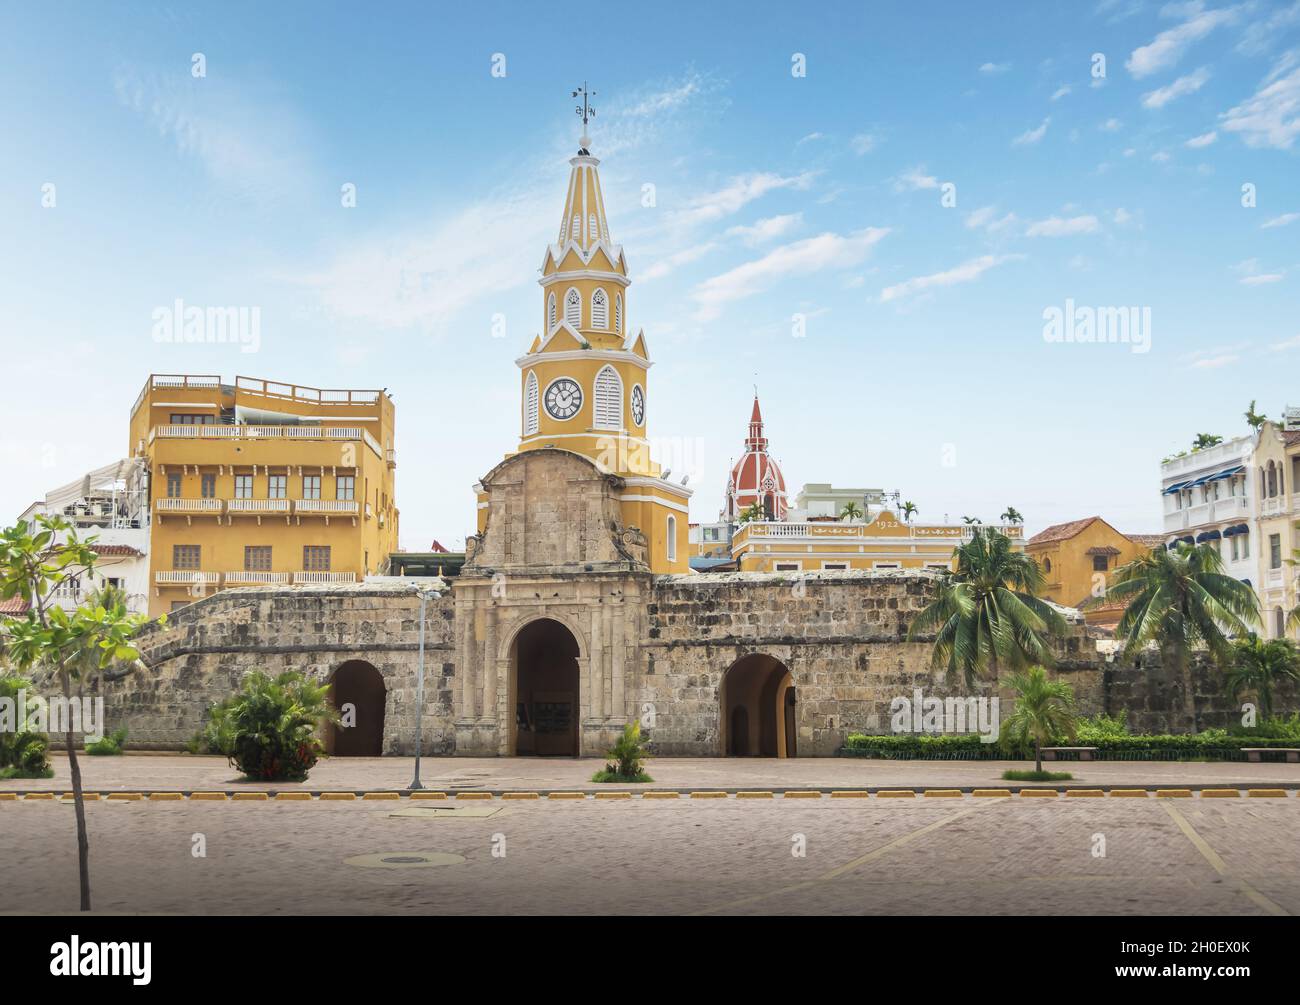 Gate and Clock Tower - Cartagena de Indias, Colombia Stock Photo